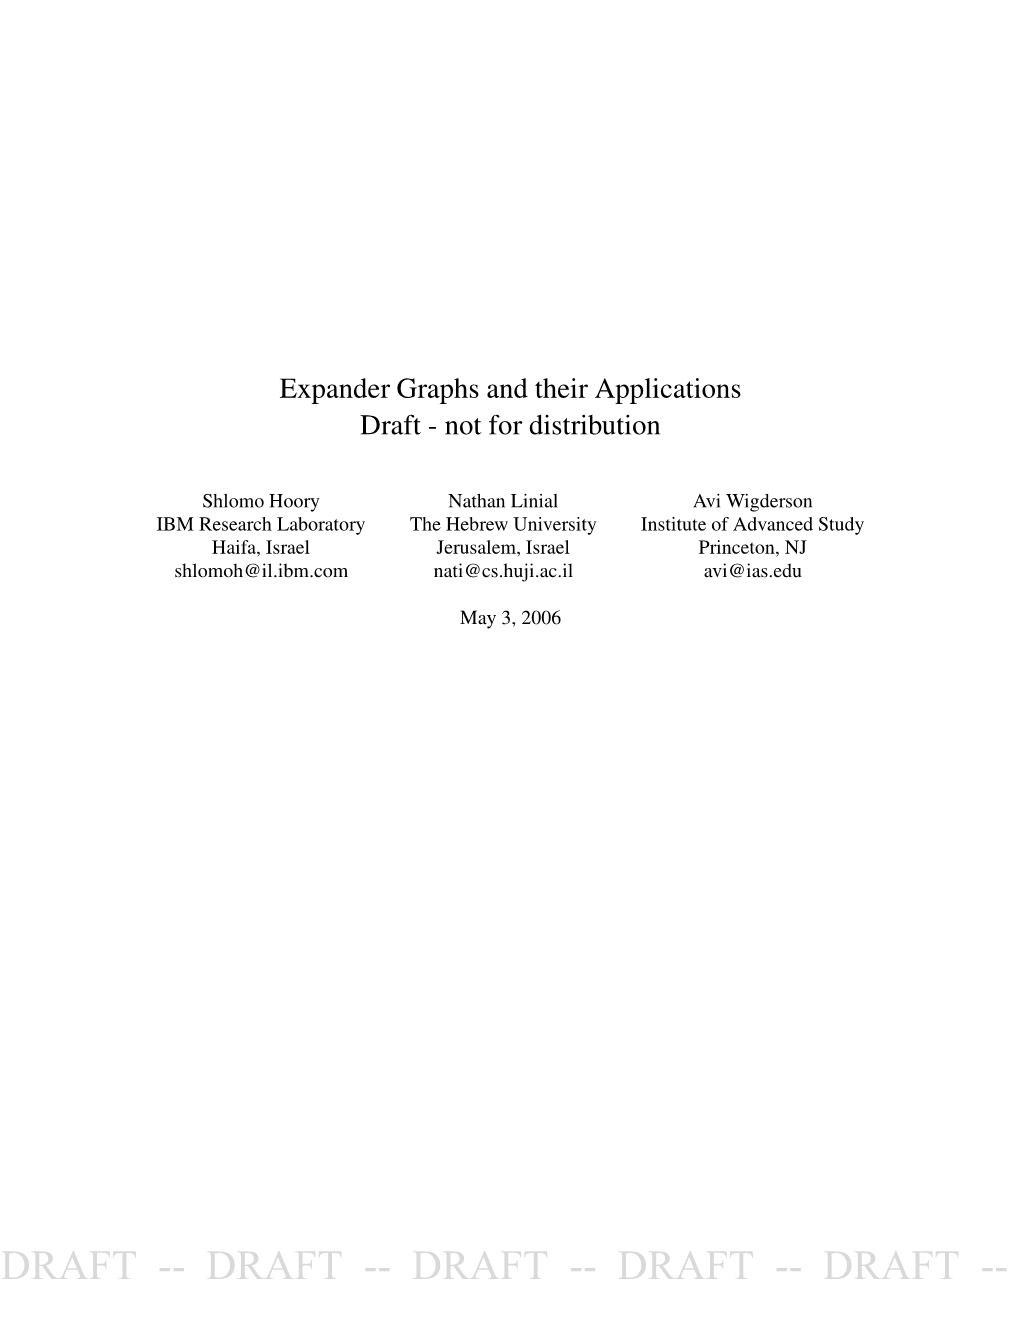 Expander Graphs and Their Applications Draft - Not for Distribution